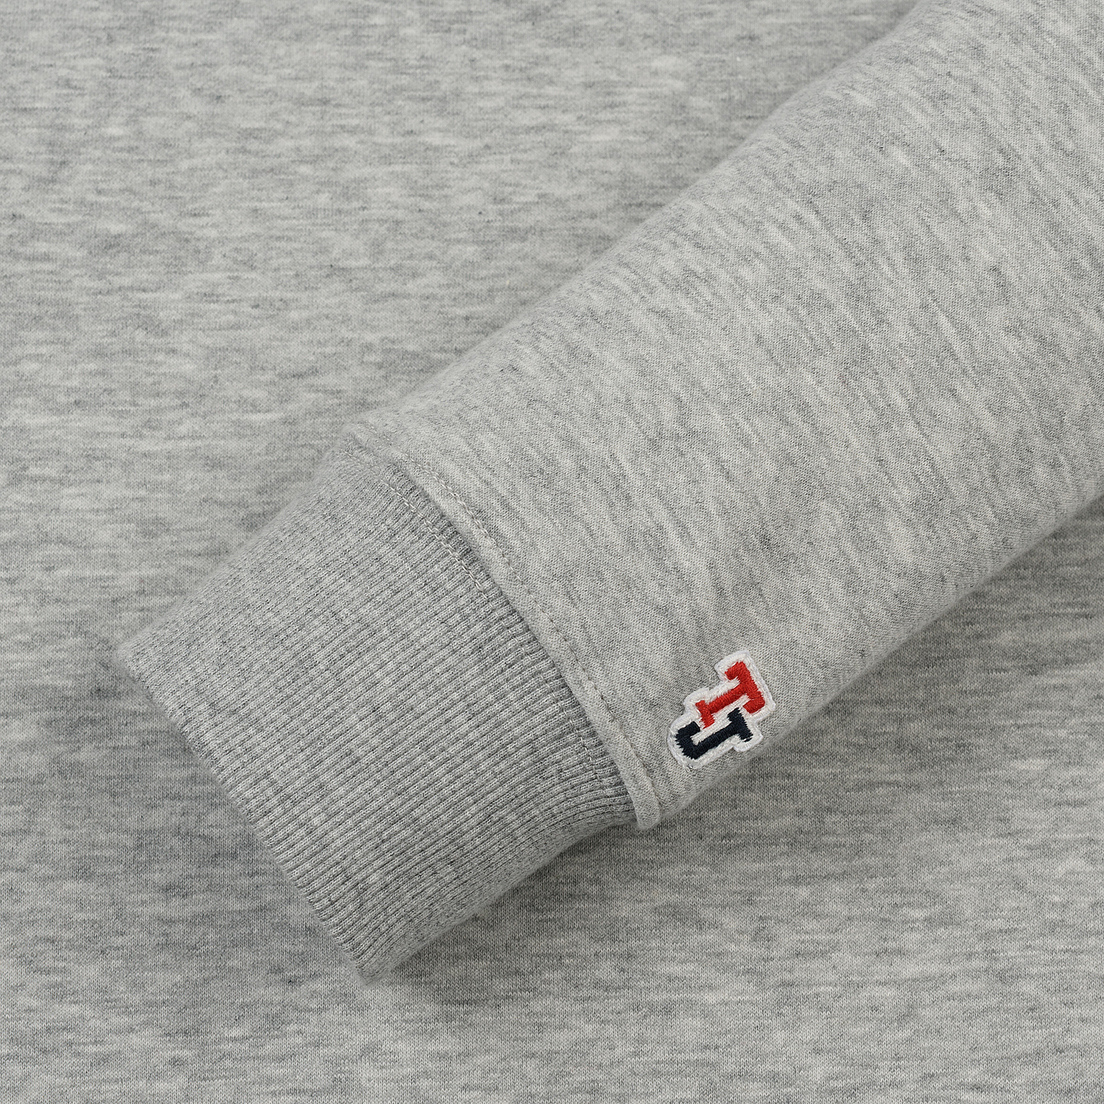 Tommy Jeans Женское платье Tommy Classic Sweat